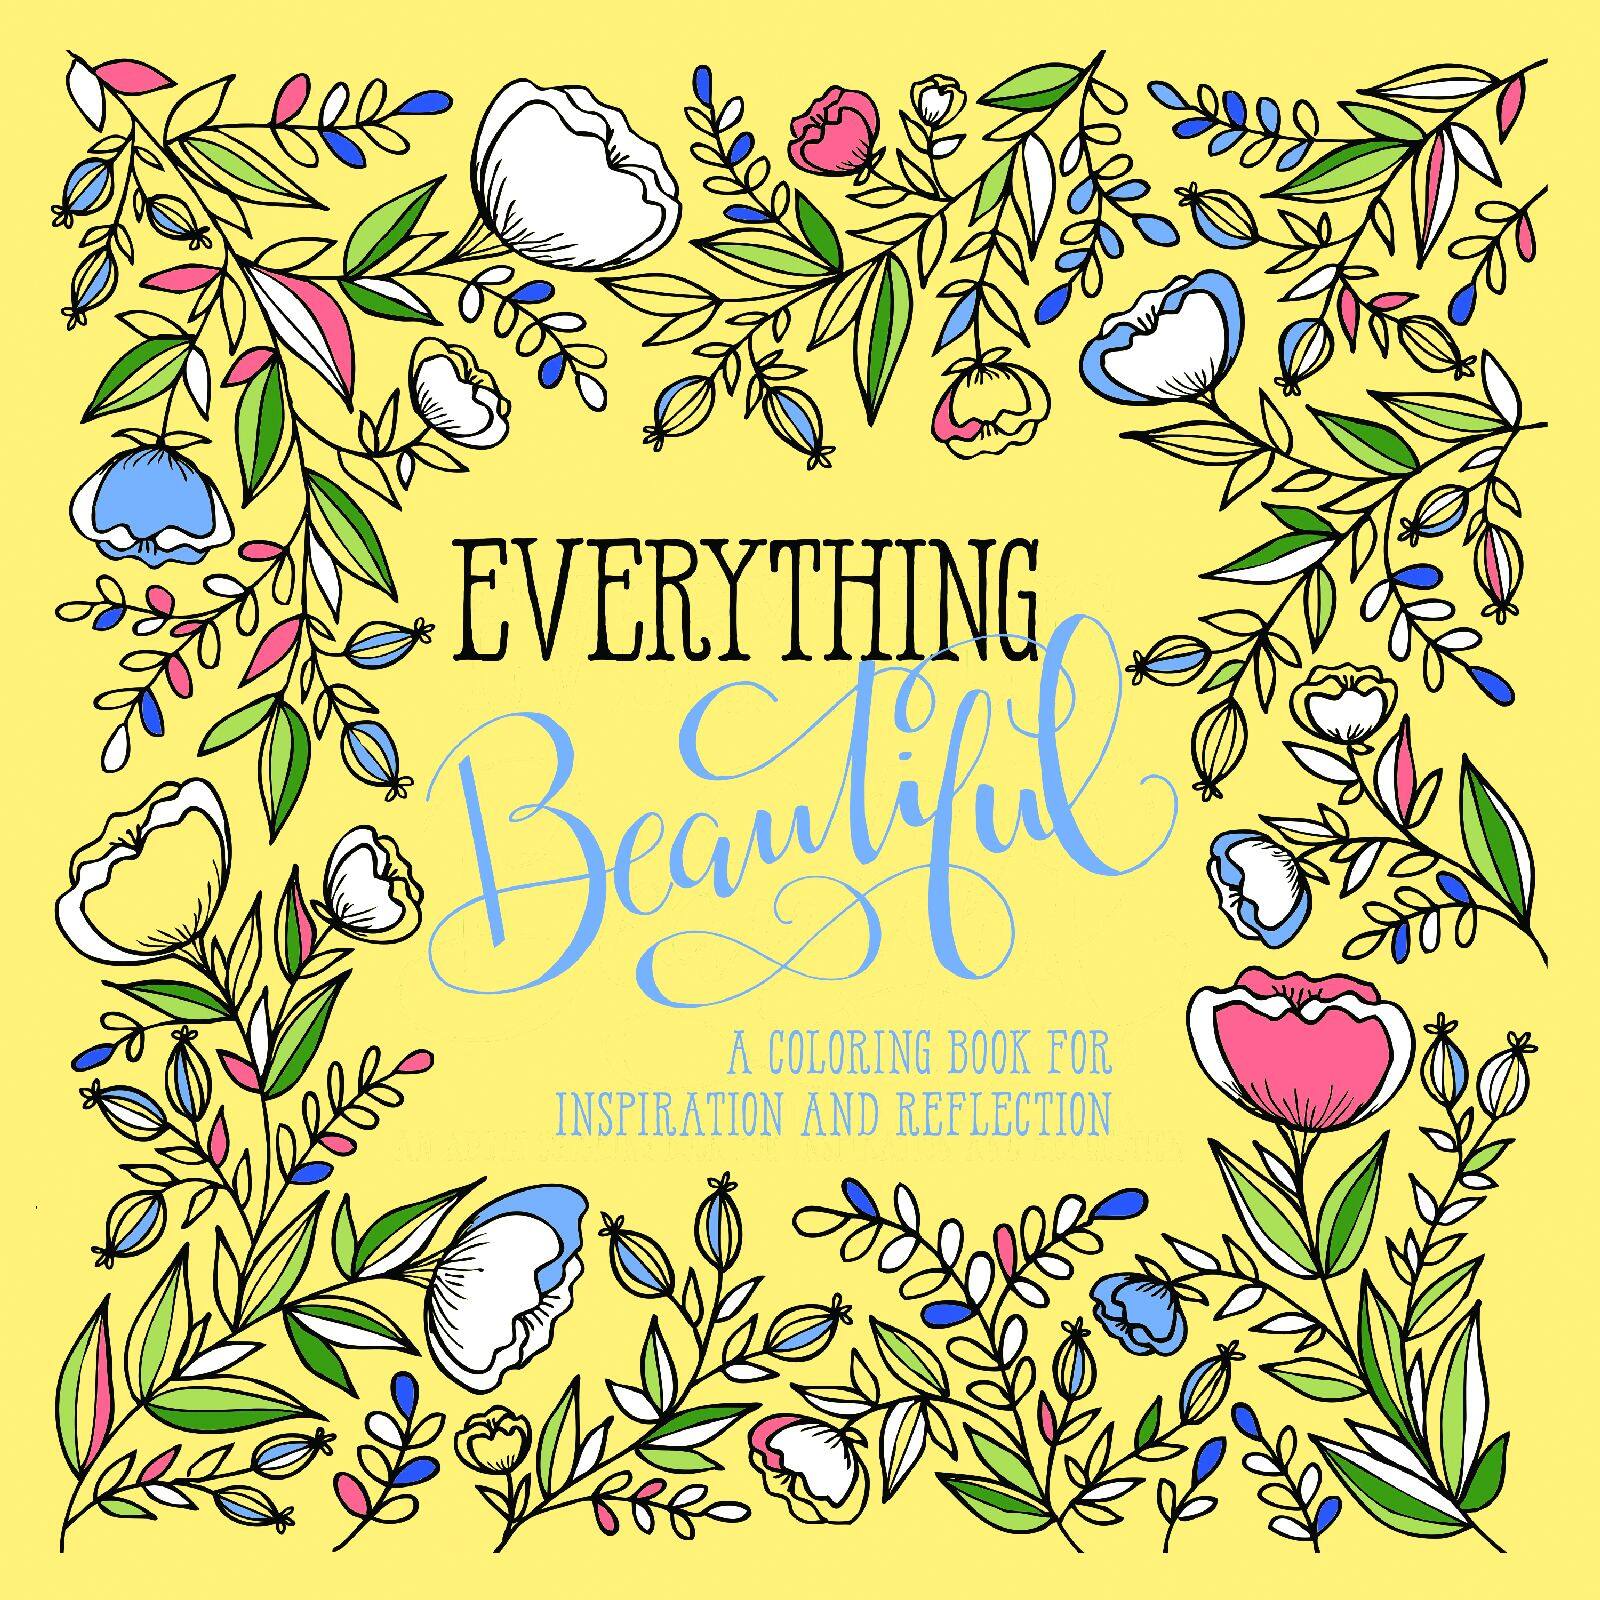 Download Shop For The Everything Beautiful An Adult Coloring Book For Reflection And Inspiration At Michaels Com